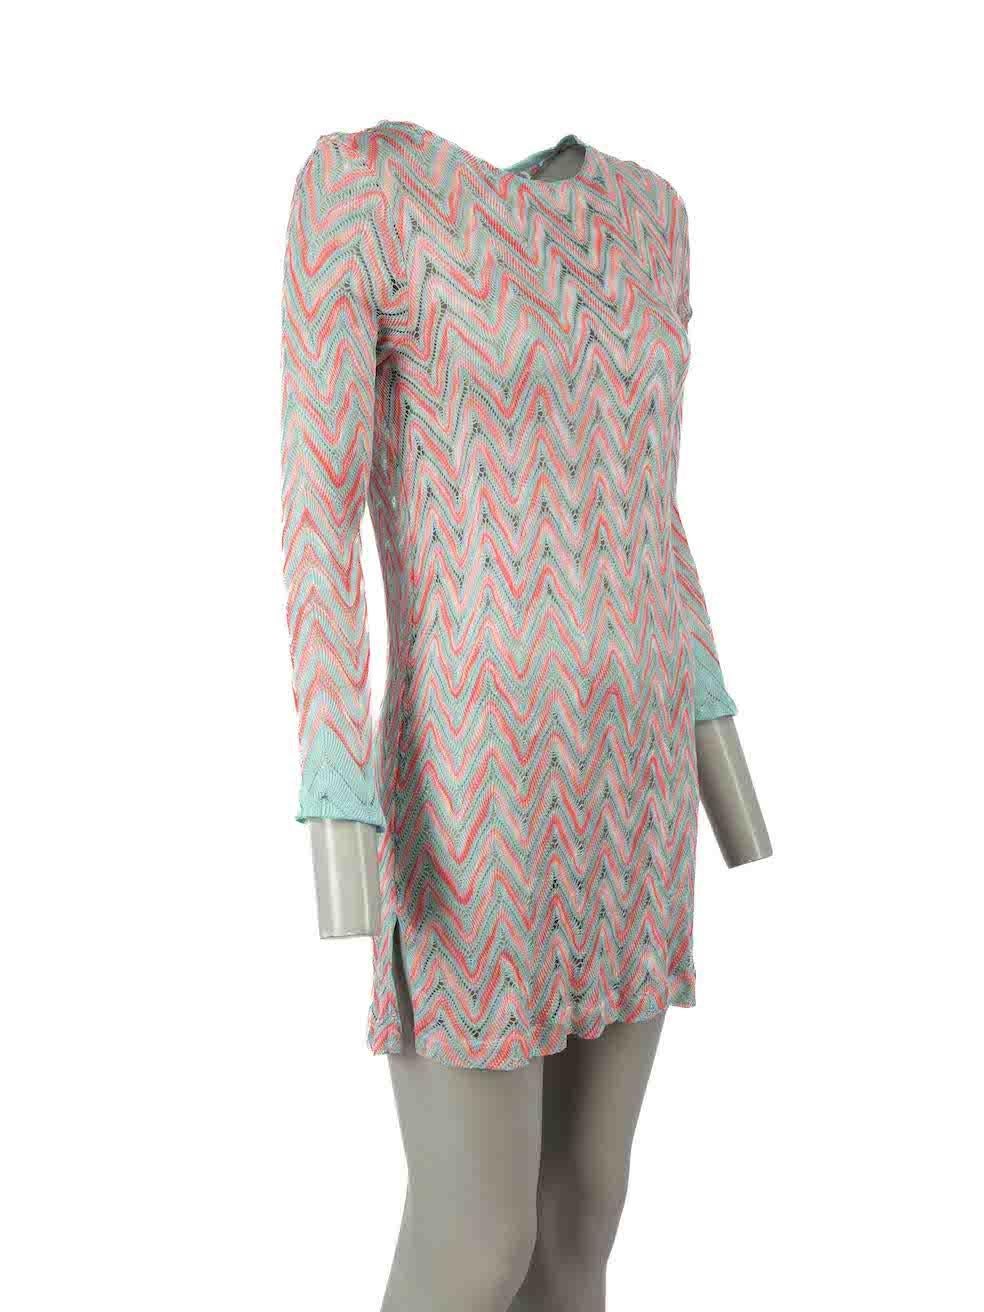 CONDITION is Very good. Hardly any visible wear to beach coverup is evident on this used Missoni Mare designer resale item.
 
 Details
 Multicolour
 Synthetic
 Beach dress
 Round neck
 Long sleeves
 Knitted
 See-through
 Open back
 Mini
 Back button